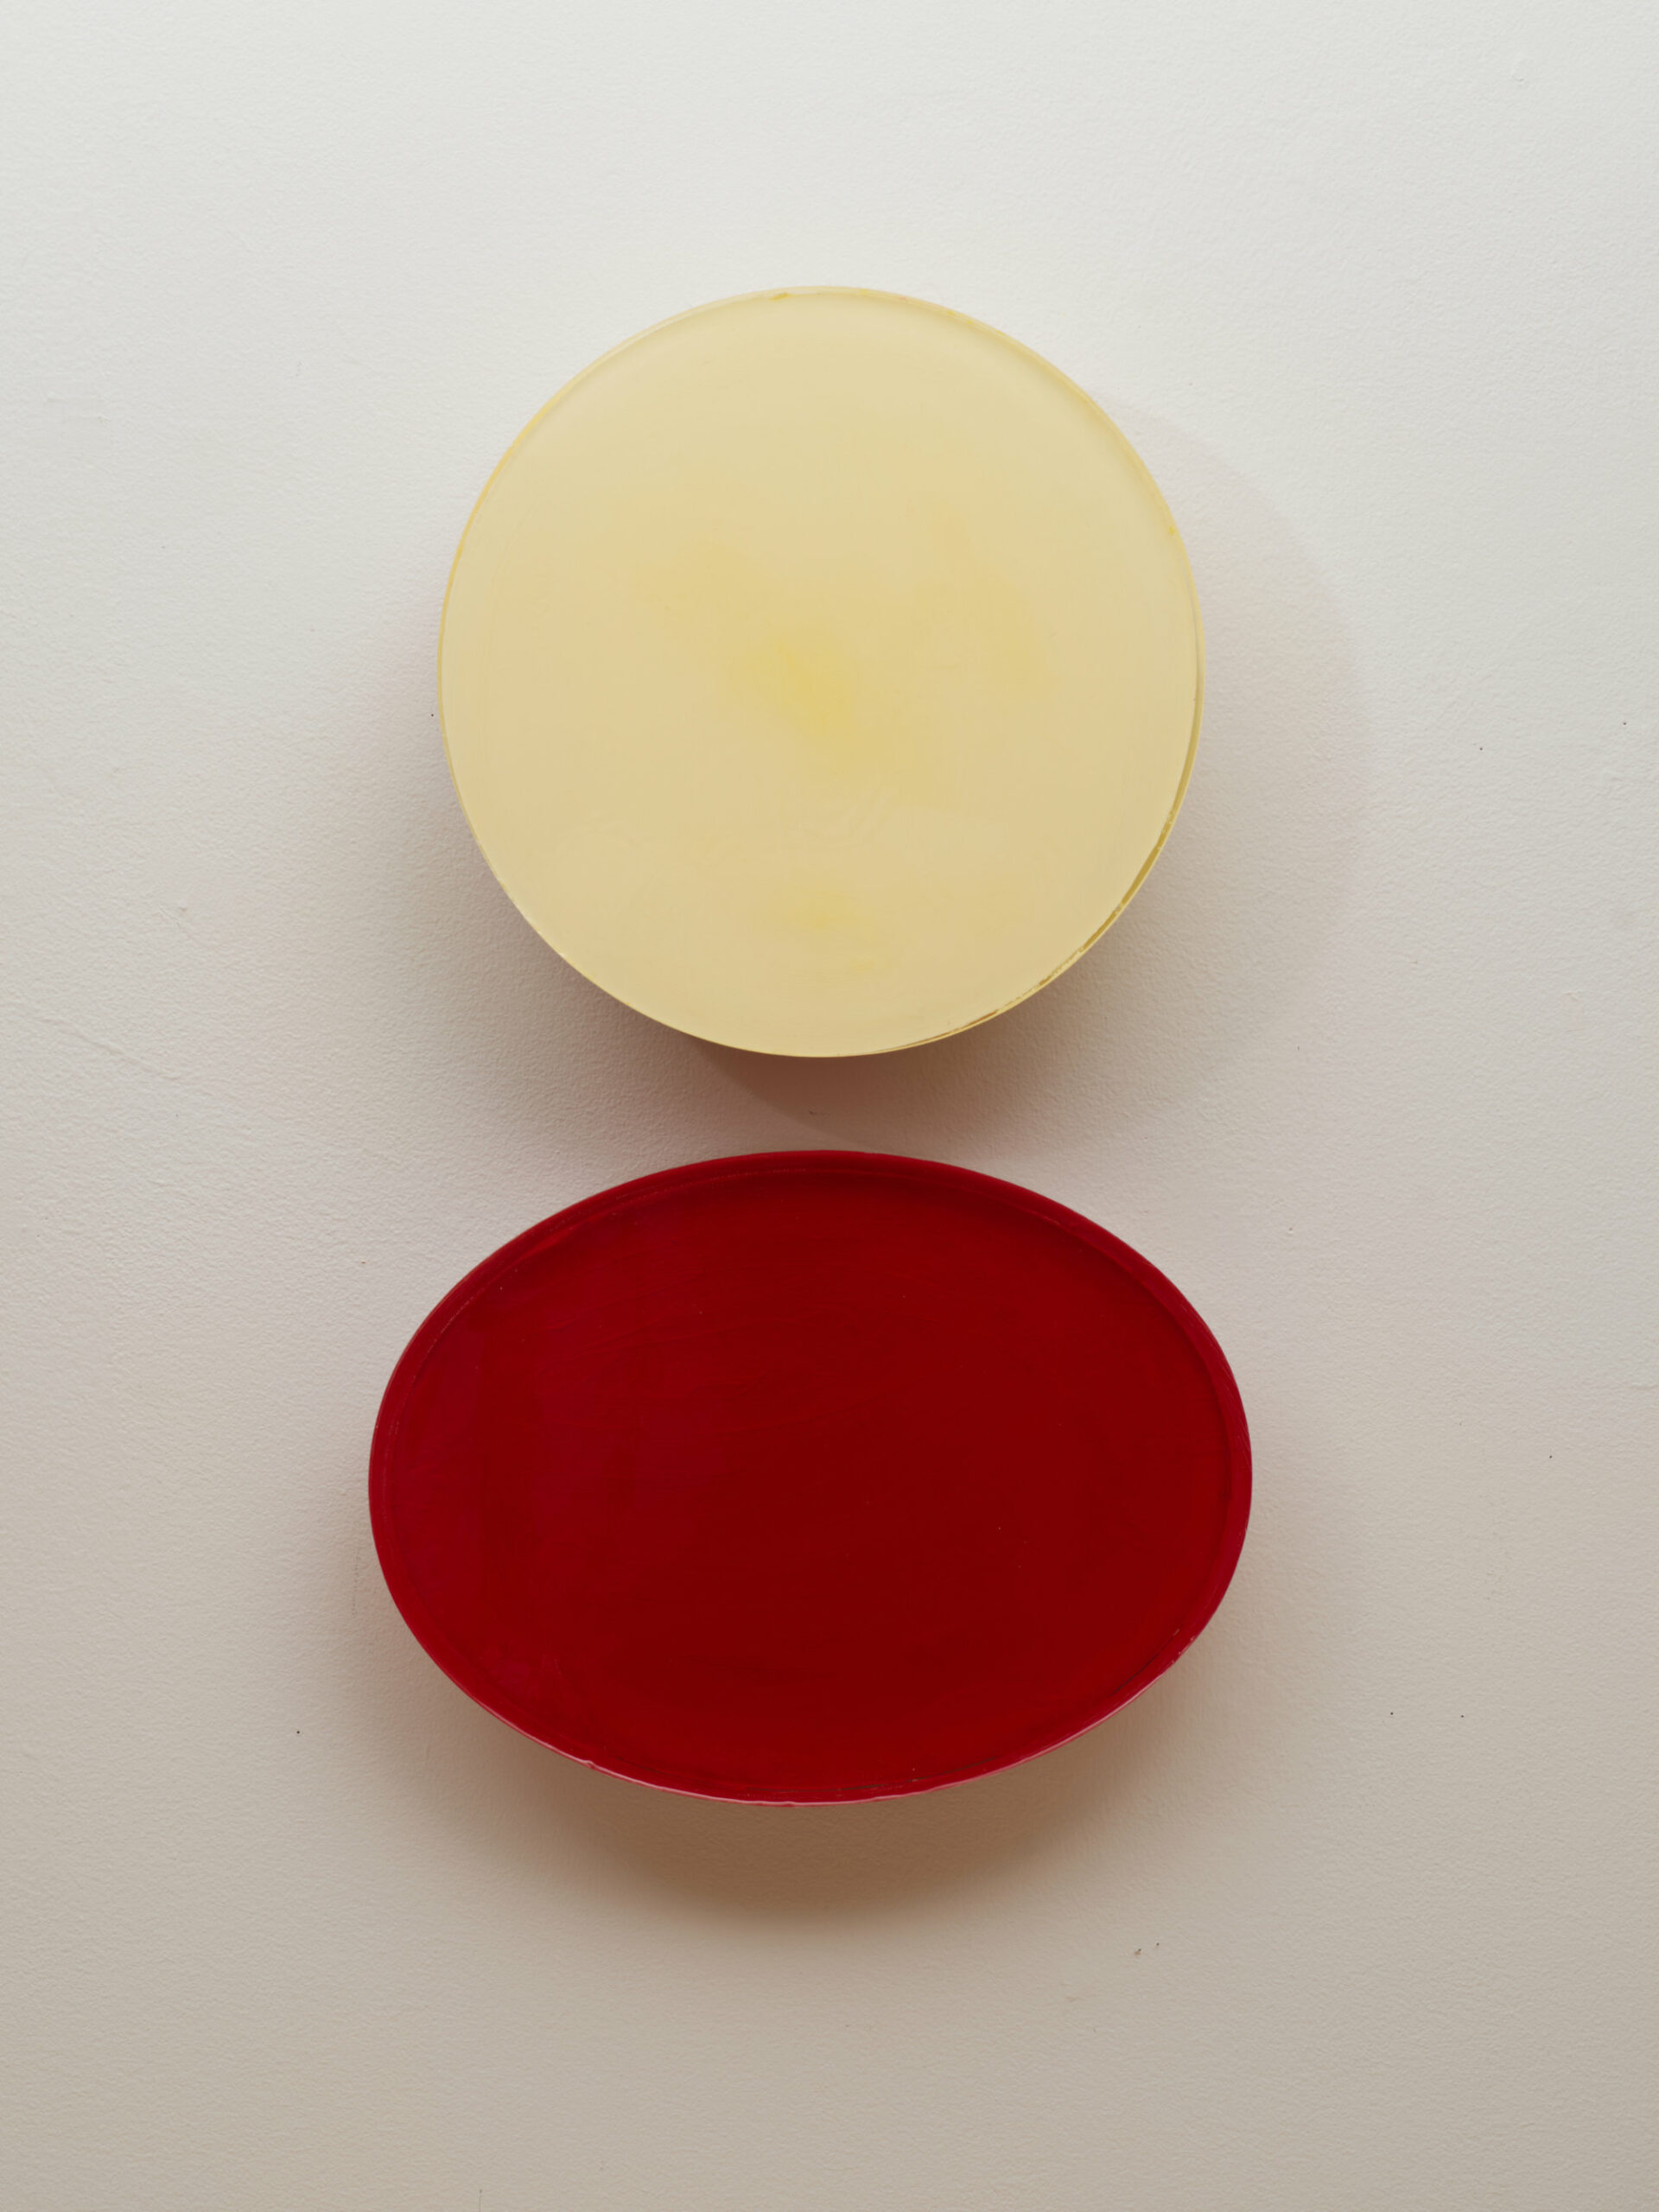 Resin Work titled "Yellow and Red" By Ana Rendich for sale by Les Yeux du Monde